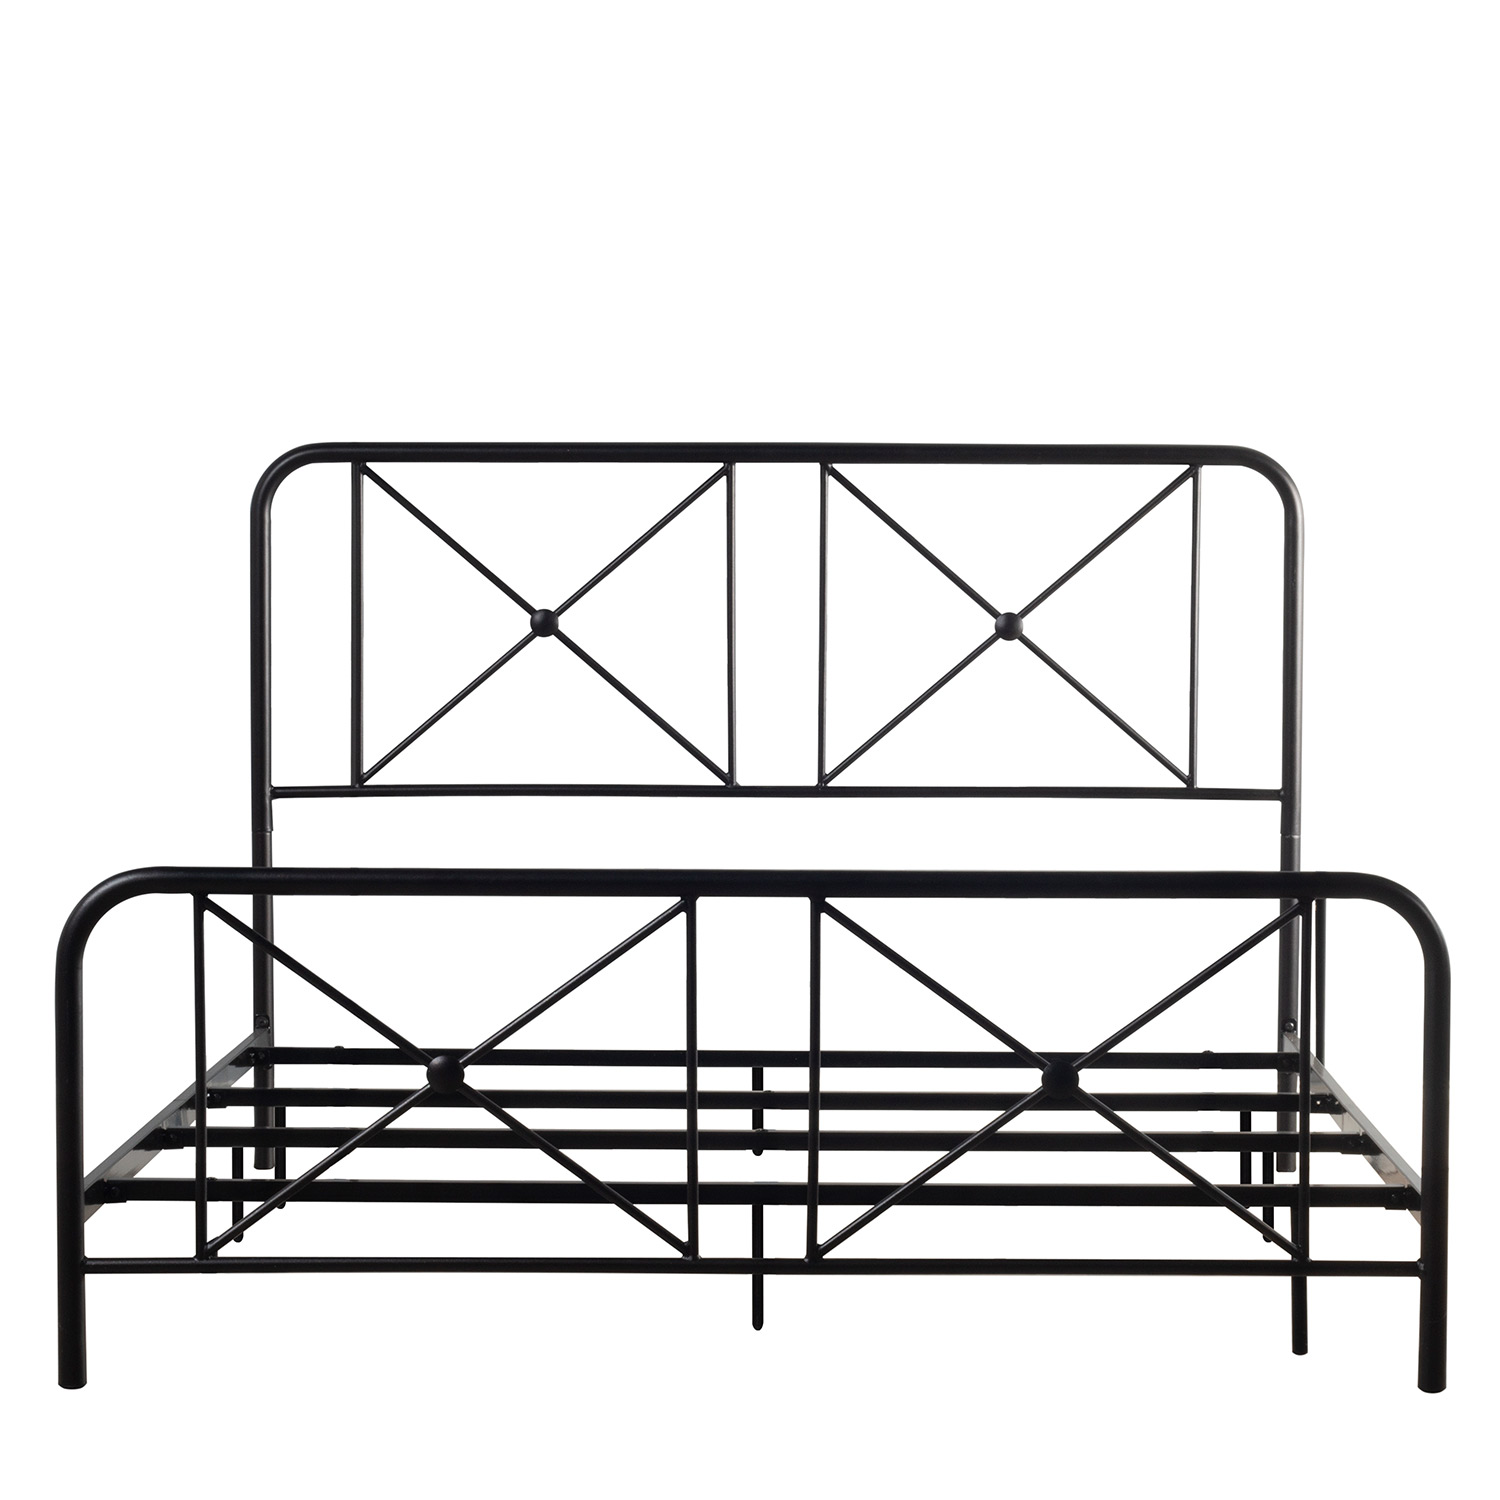 Hillsdale Williamsburg Metal Bed with Decorative Double X Design - Black